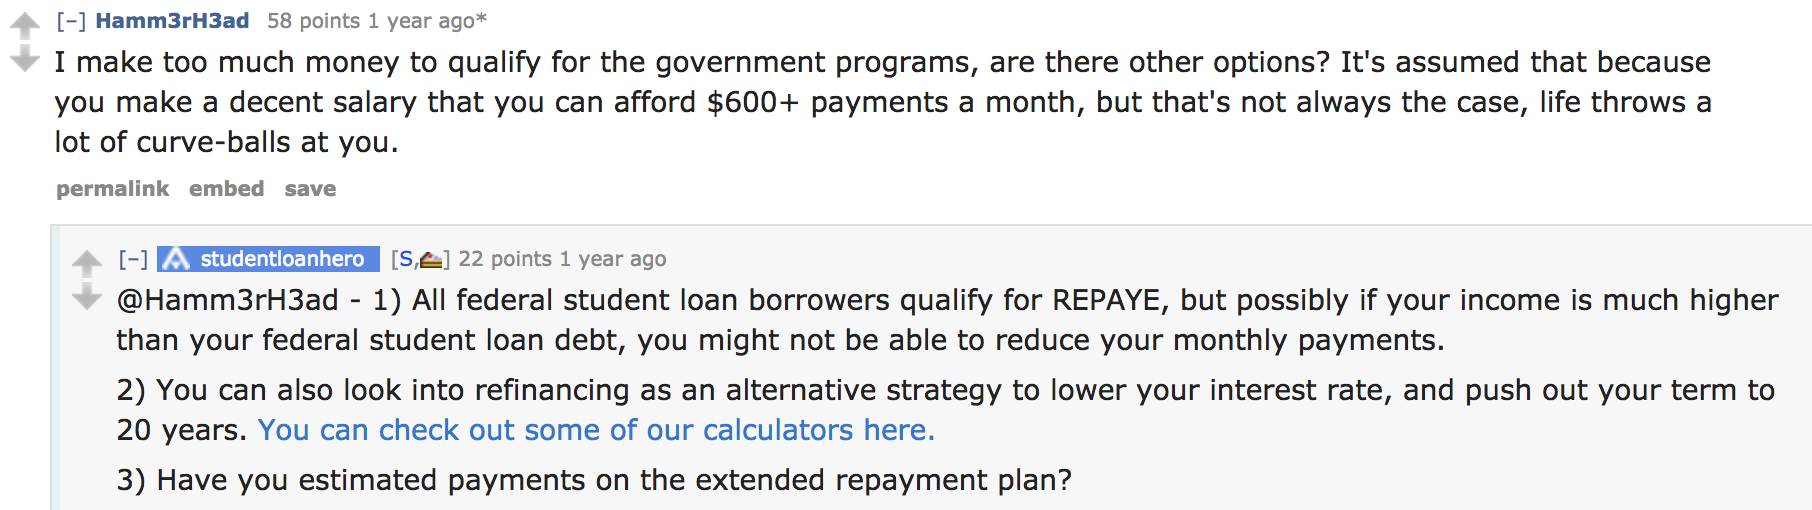 student loan hero AMA question and answer